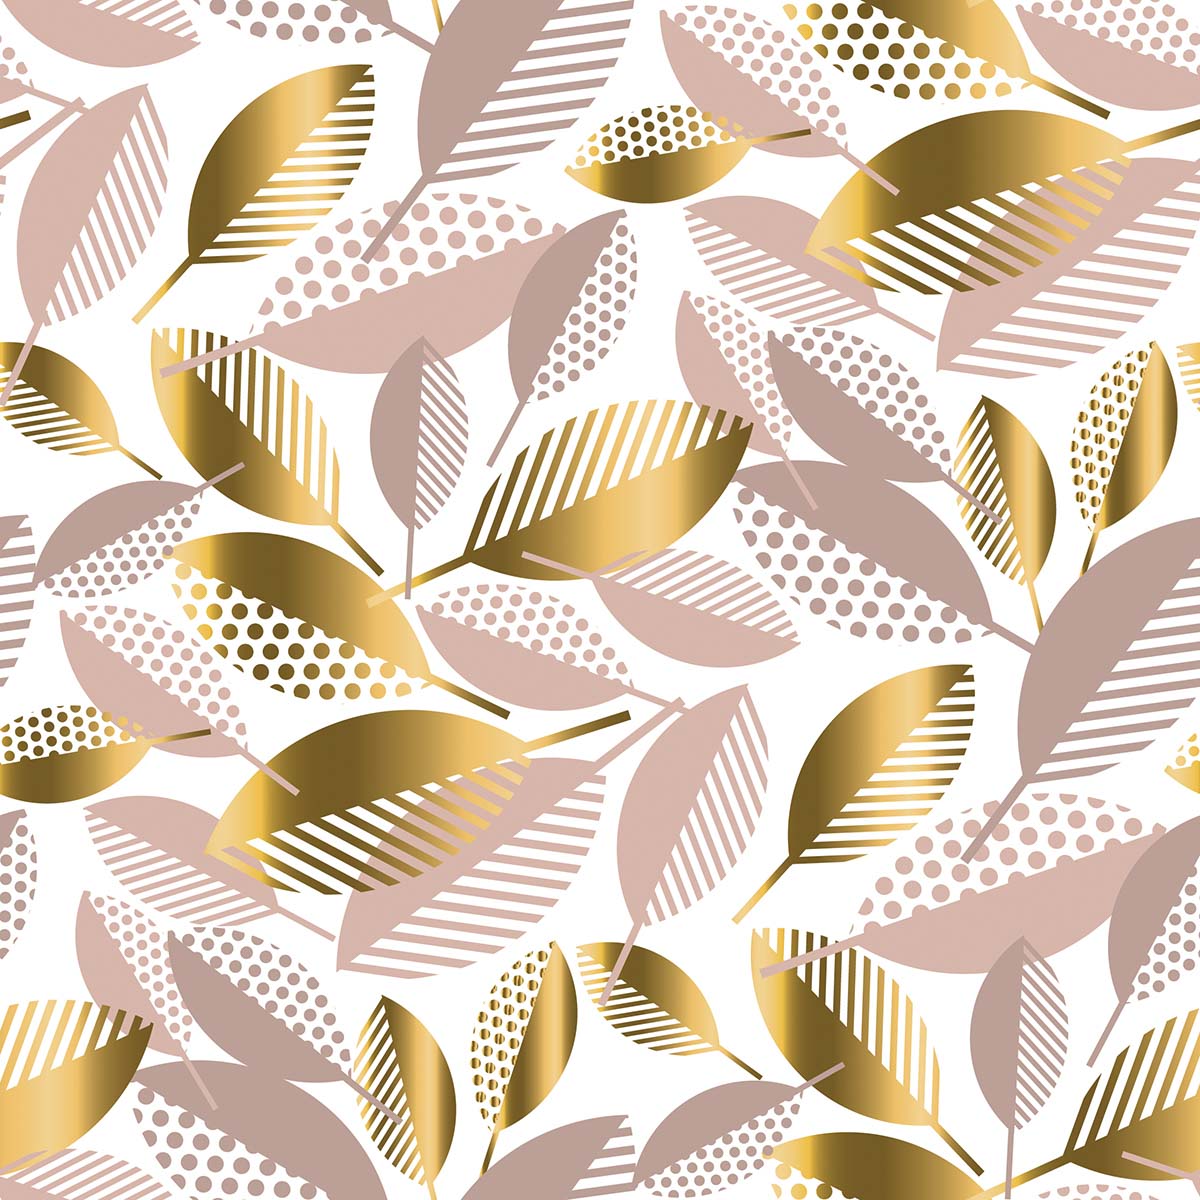 A pattern of gold and pink leaves